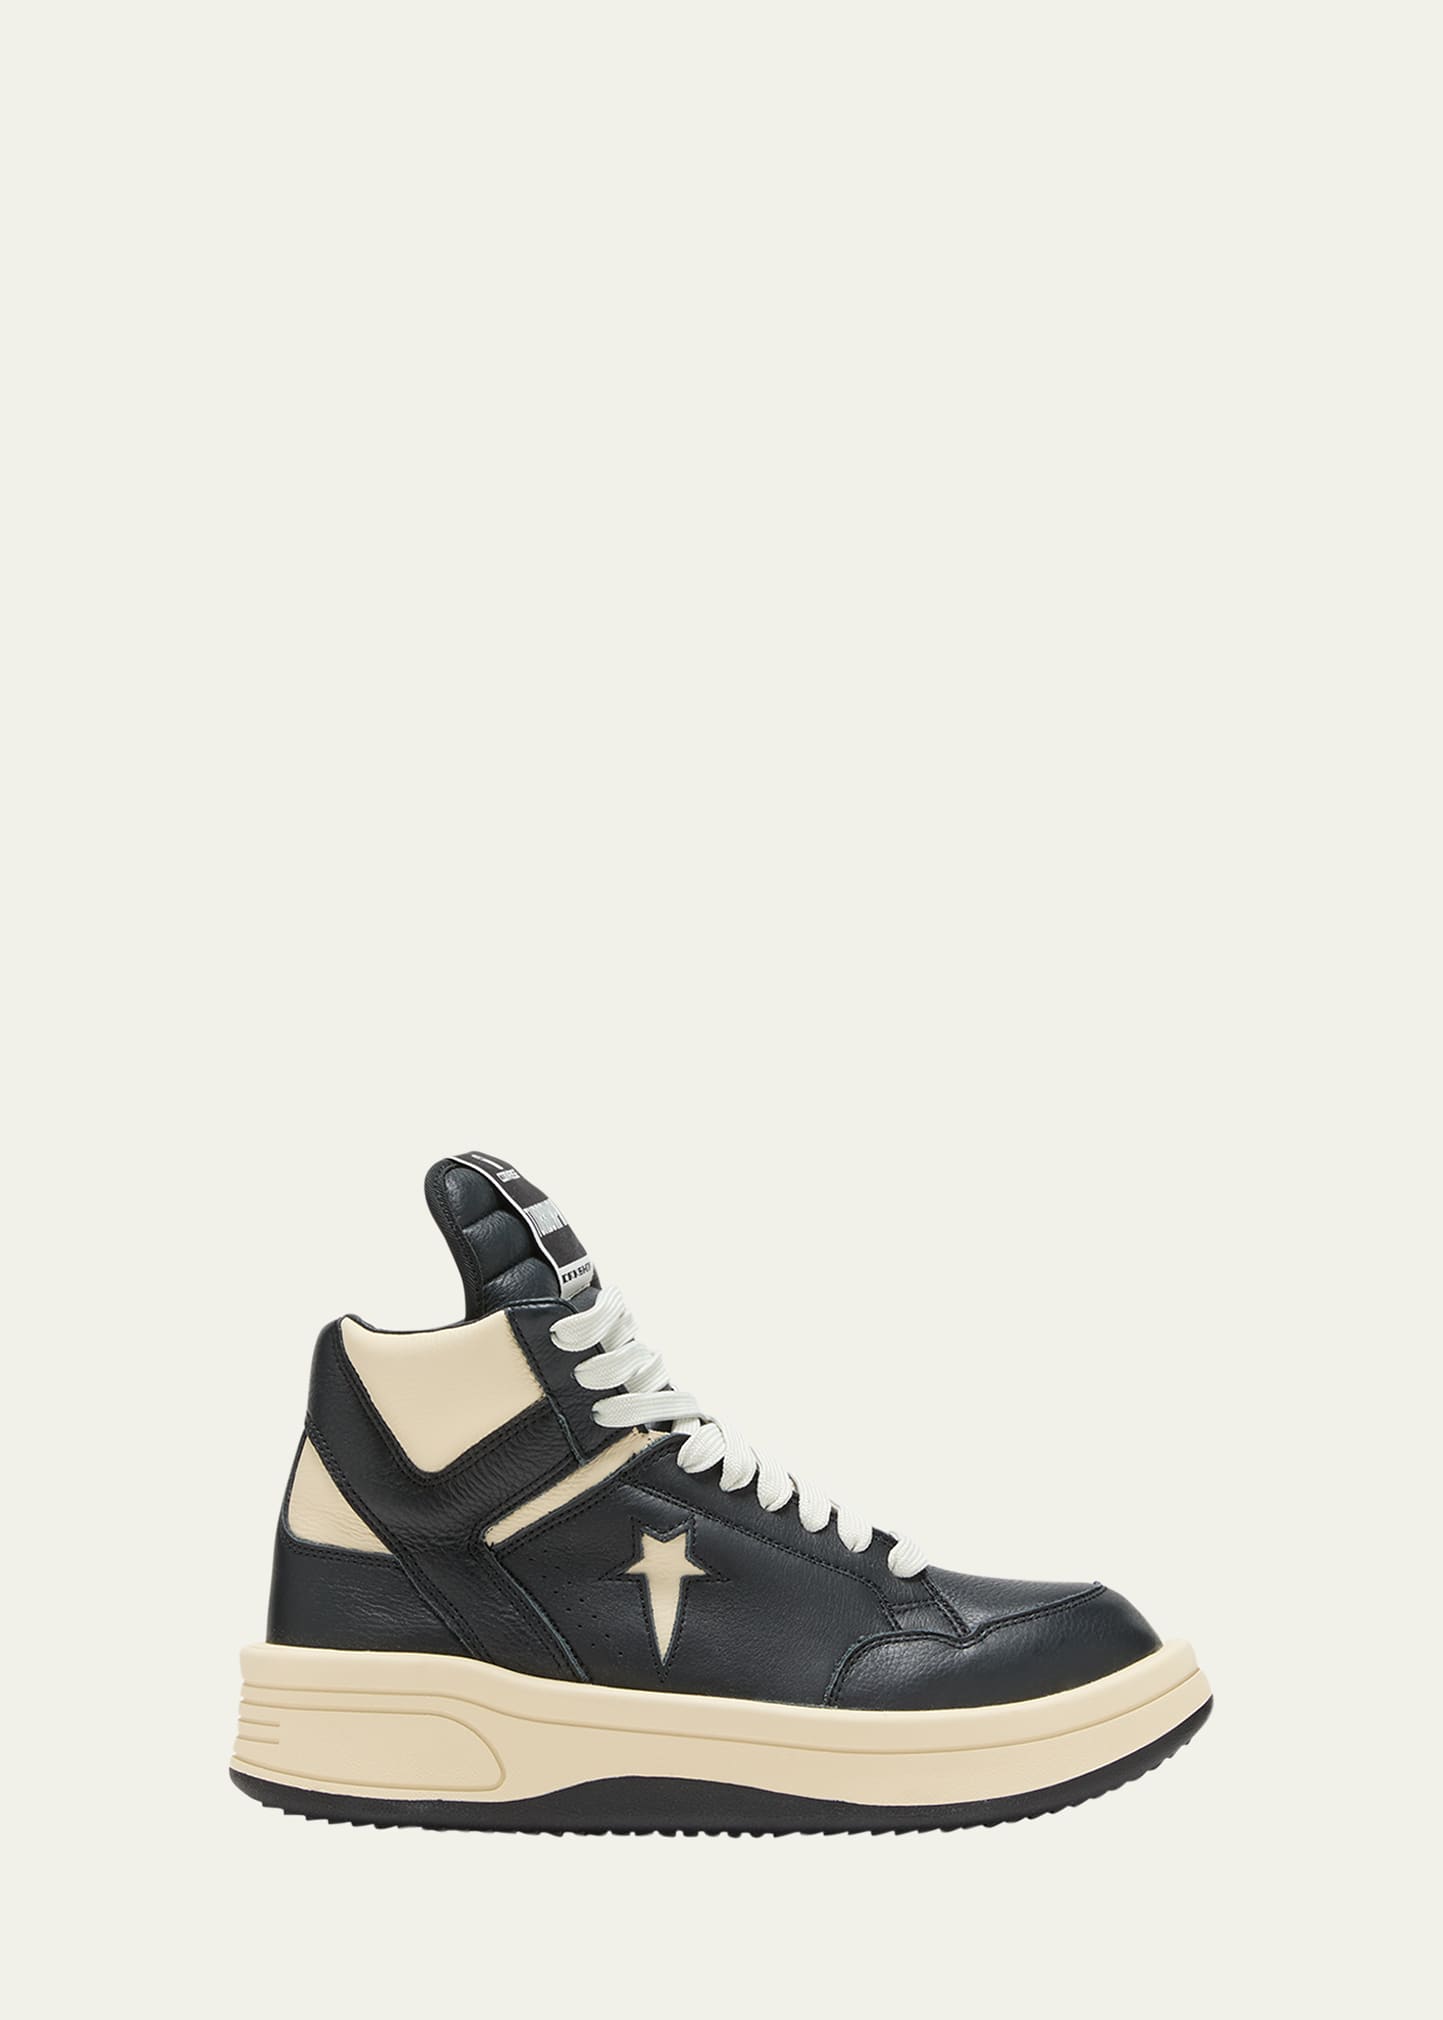 X DRKSHDW Bicolor Leather High-Top Sneakers